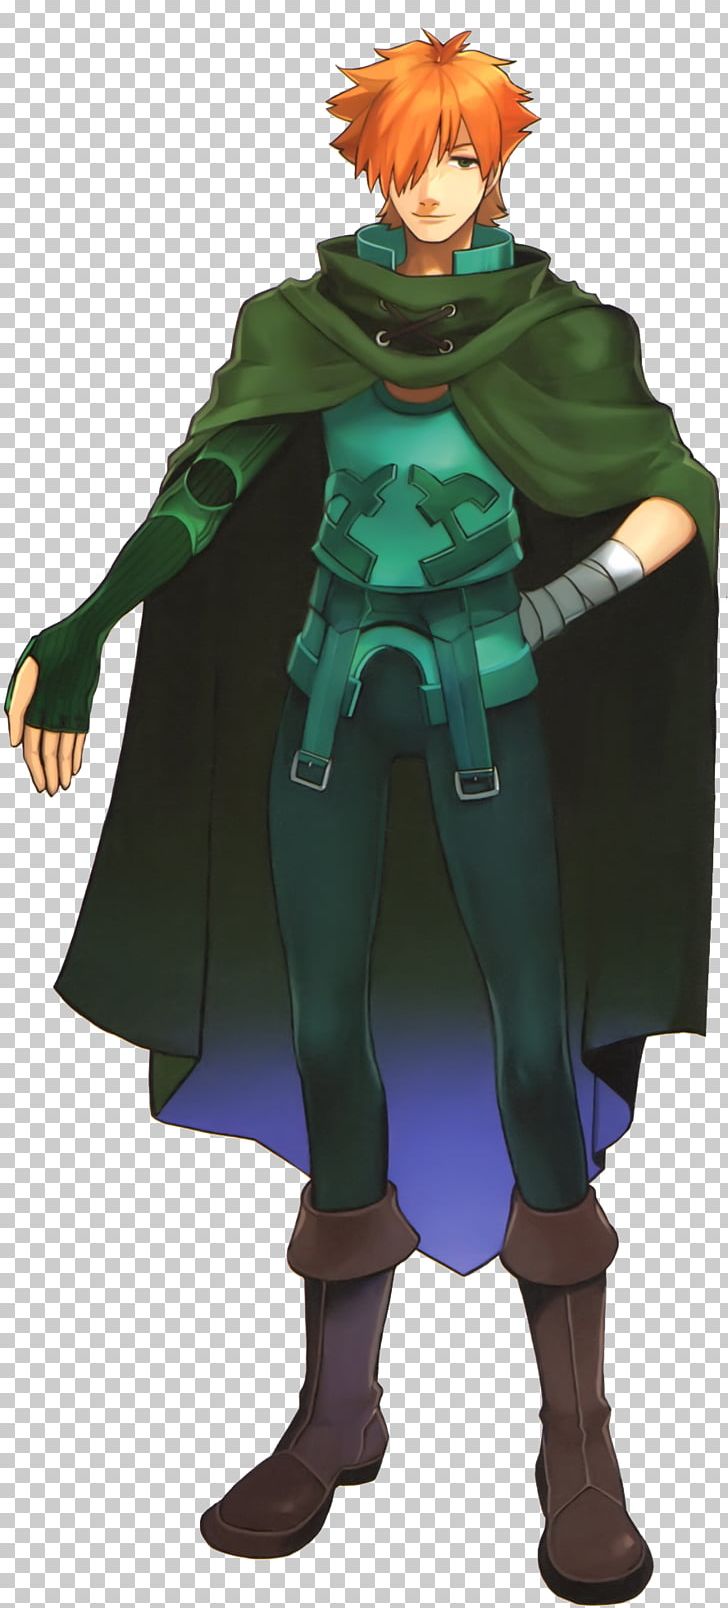 Fate/Extra Fate/stay Night Archer Saber Robin Hood PNG, Clipart, Action Figure, Anime, Archer, Cartoon, Character Free PNG Download